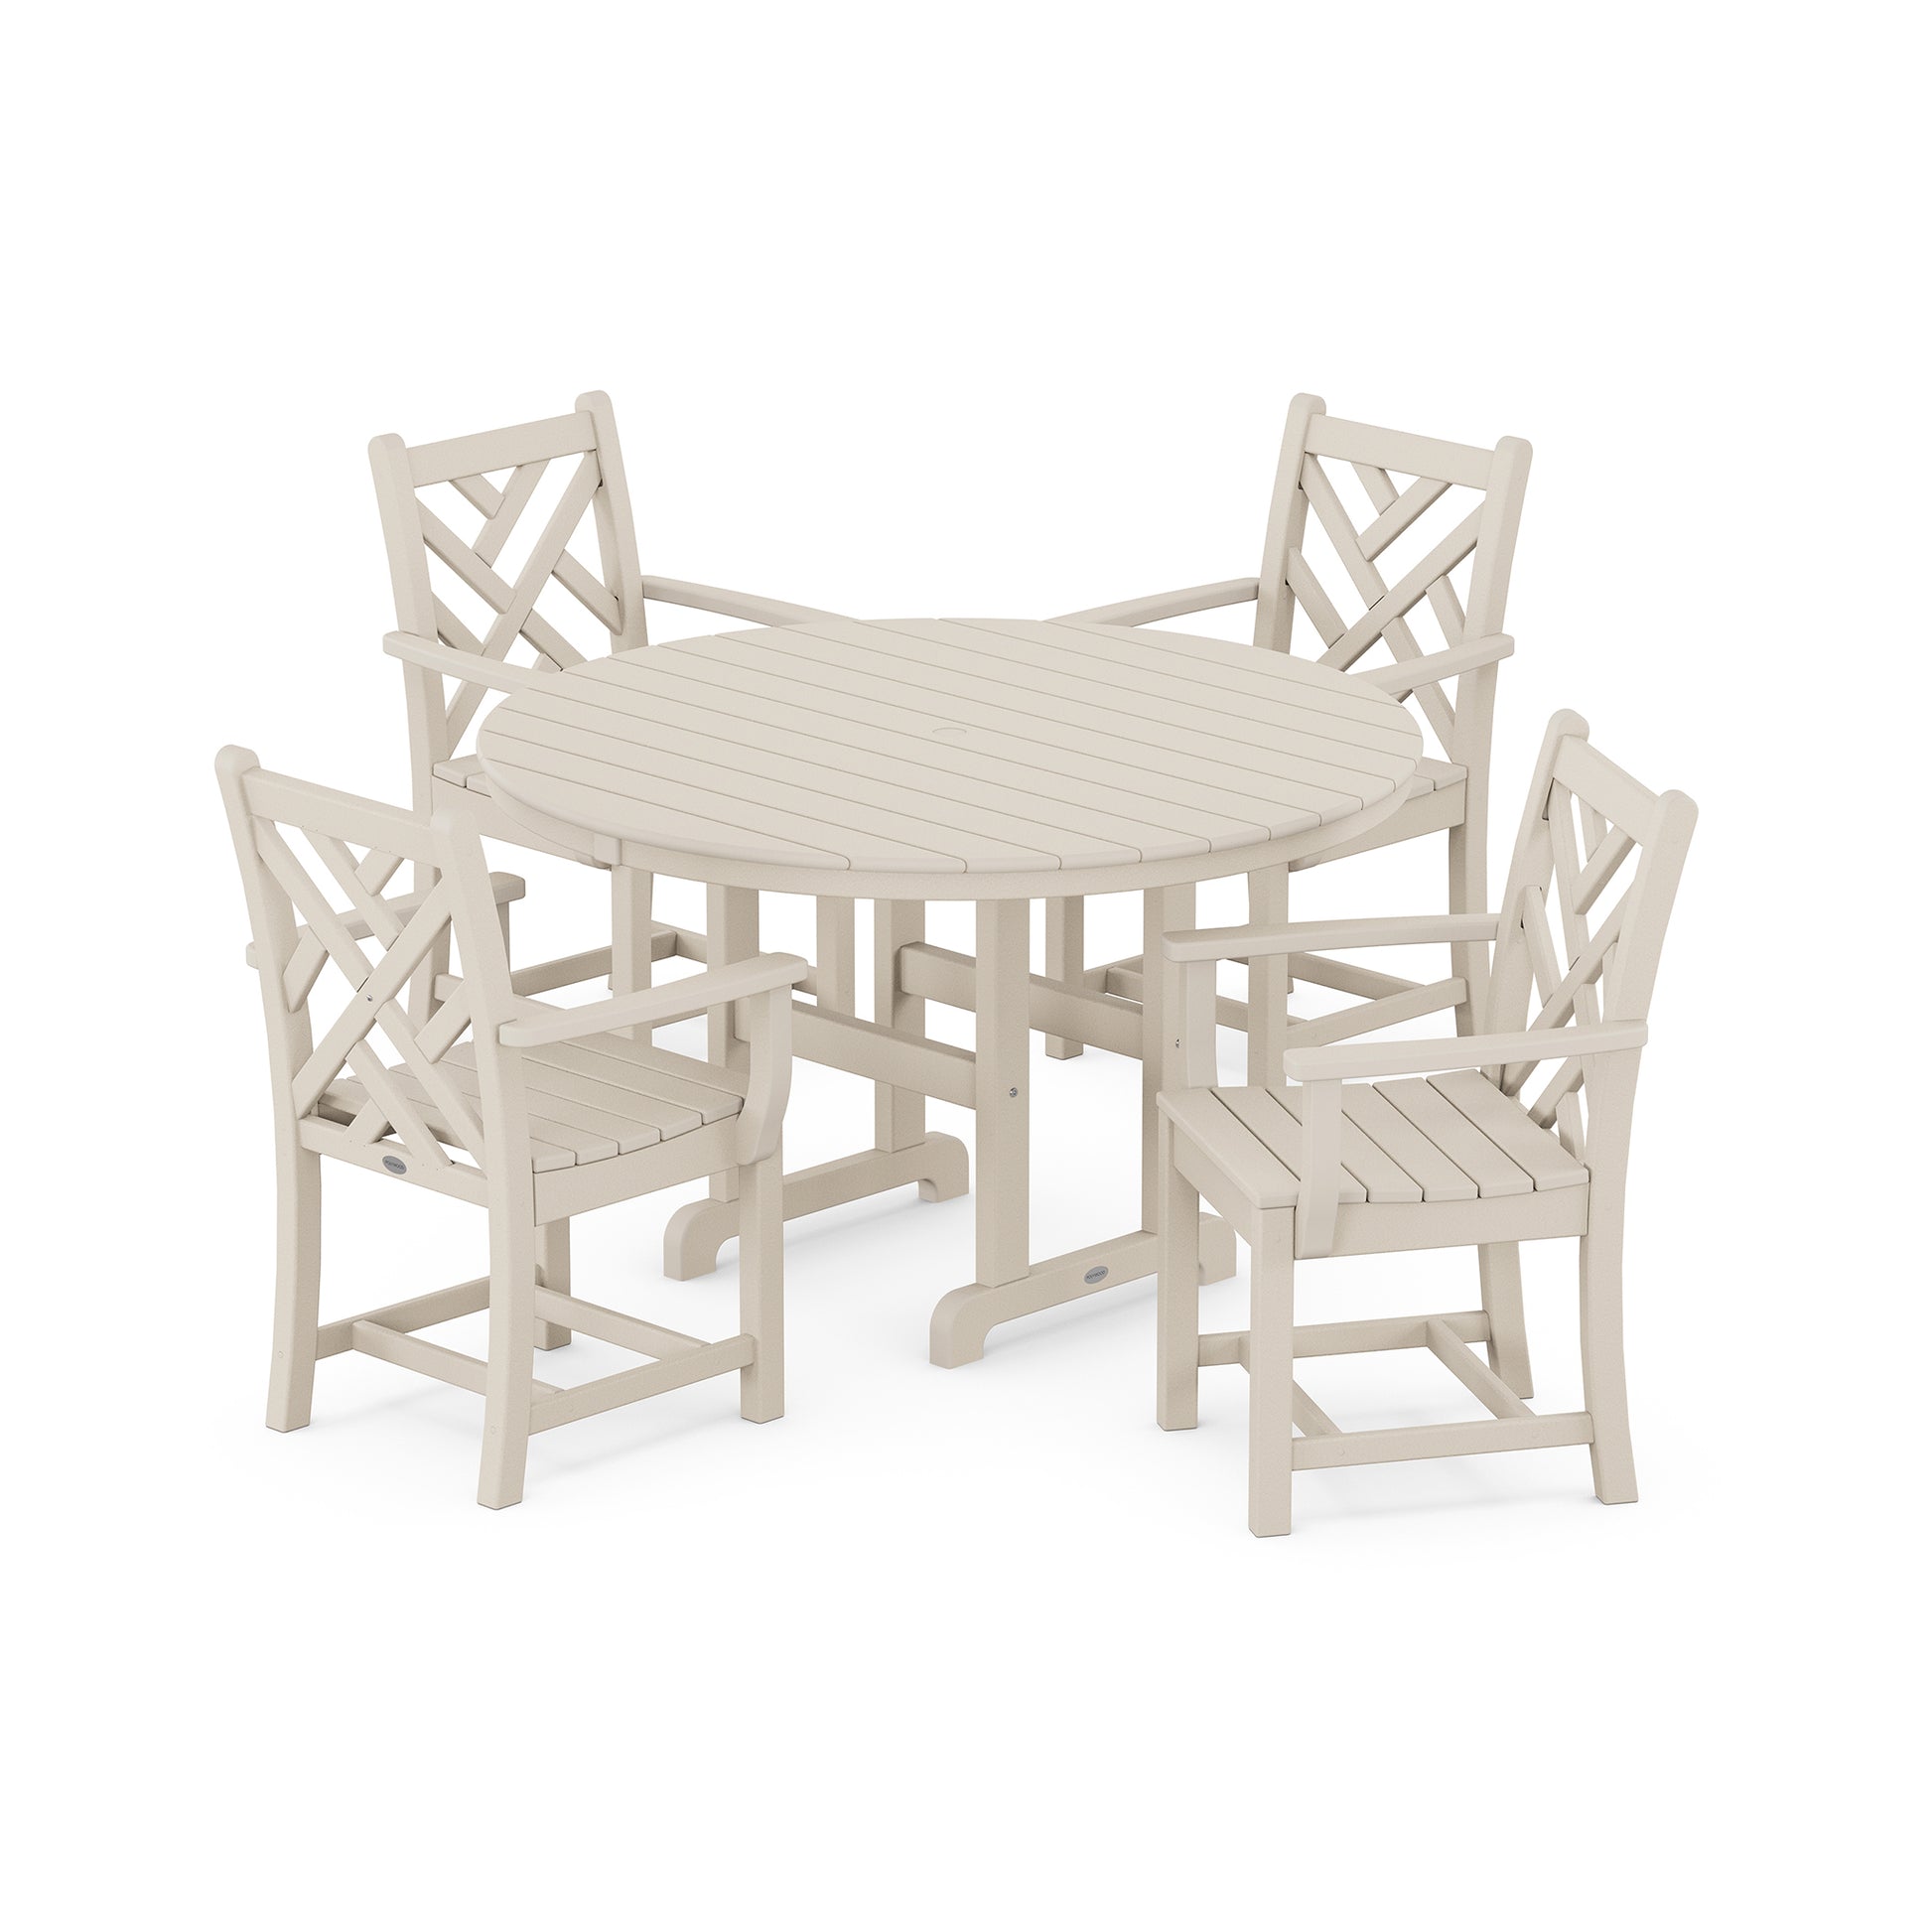 A round, beige POLYWOOD Chippendale 5-Piece Dining Set patio dining table surrounded by four matching chairs with criss-cross back designs, all set on a white background.